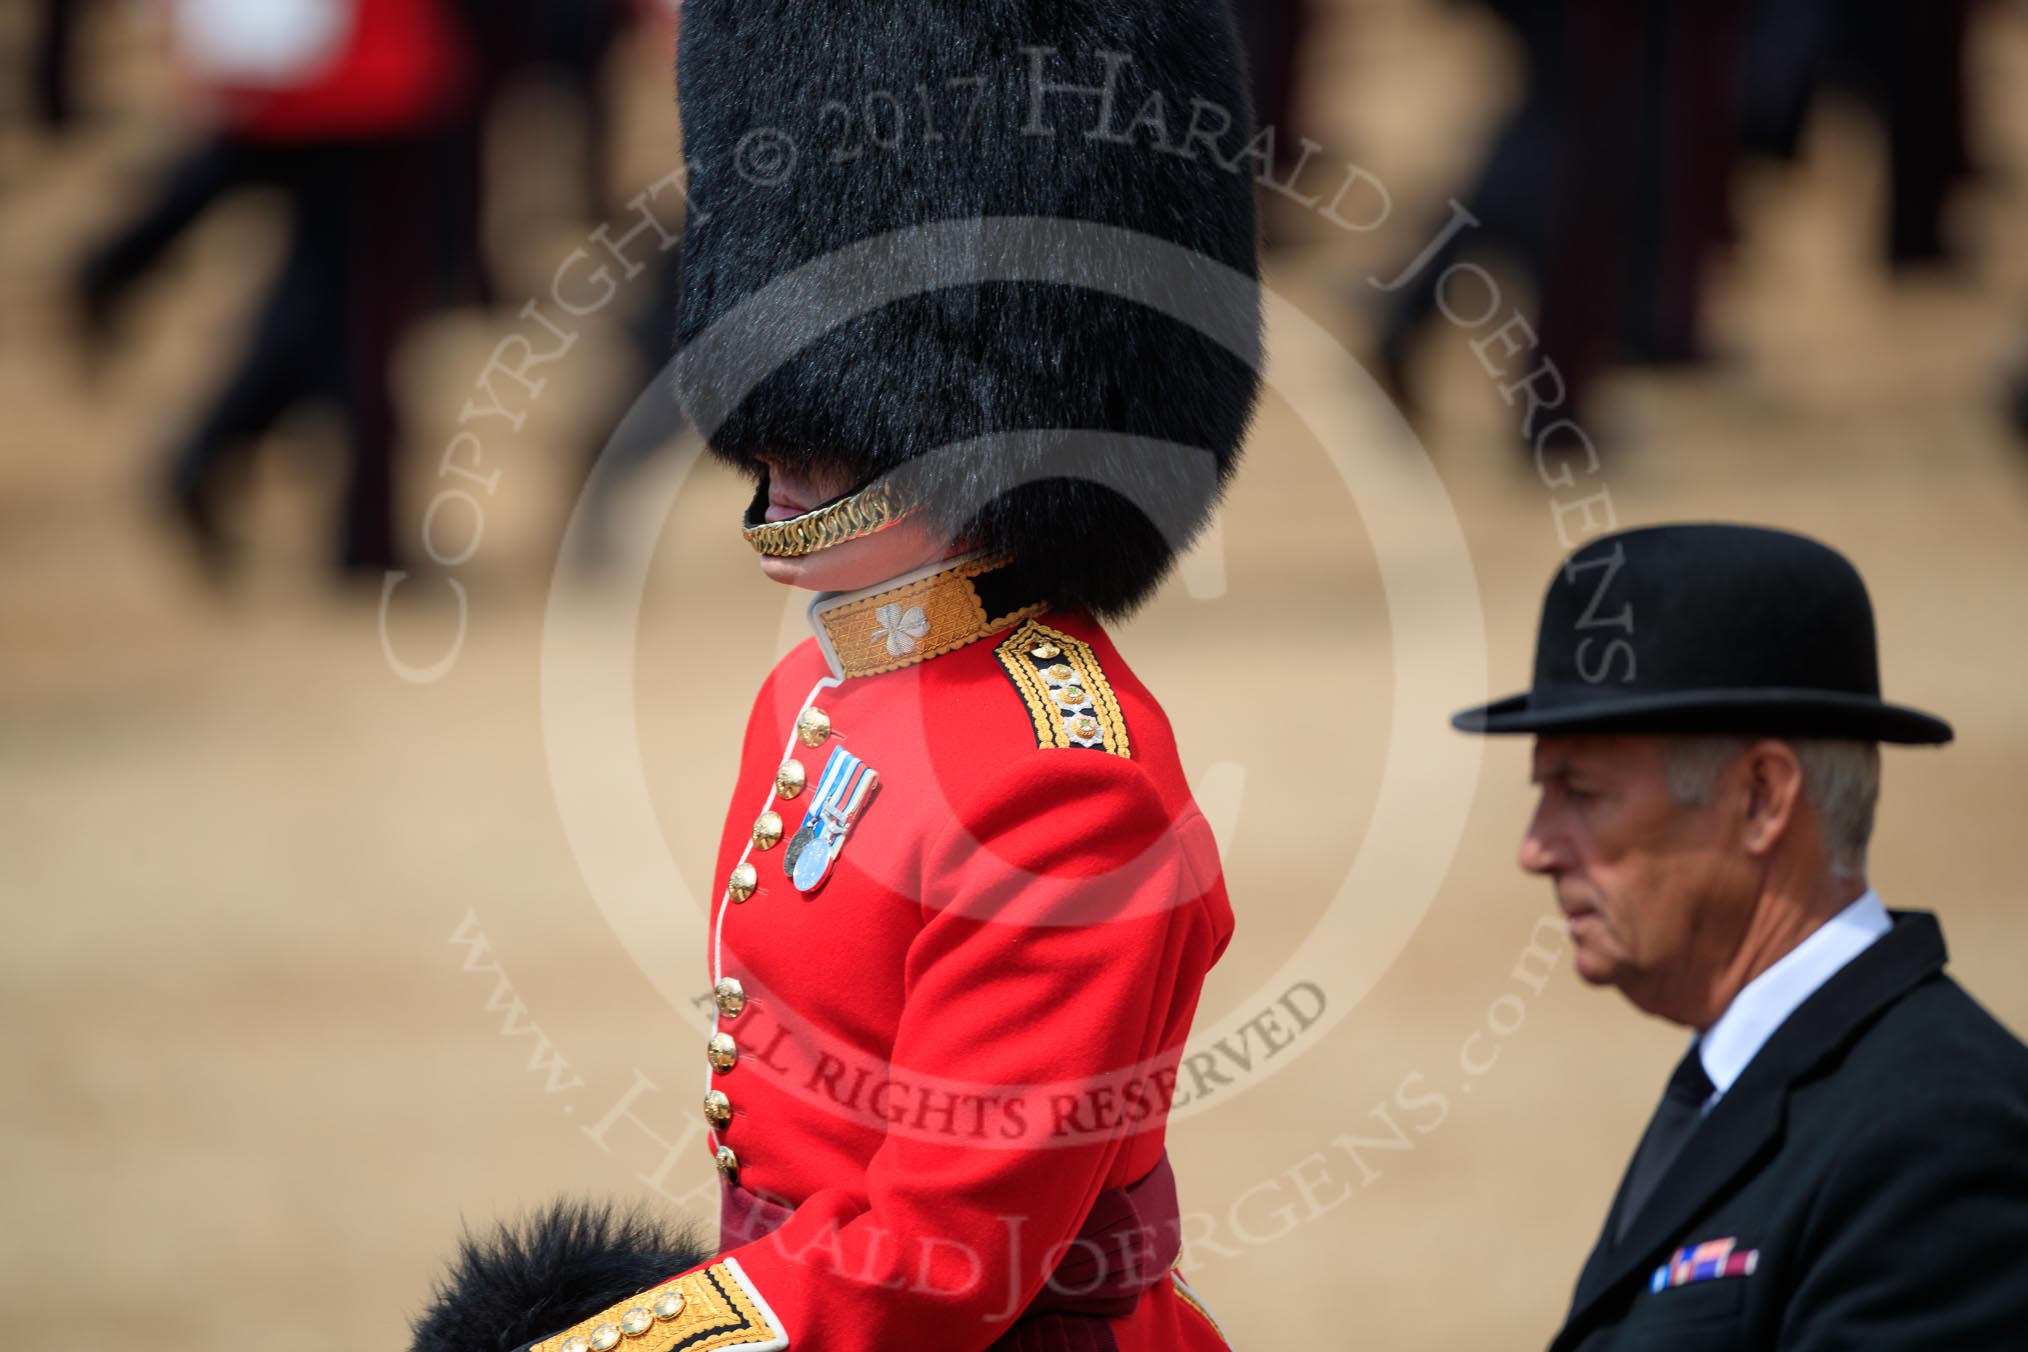 during The Colonel's Review {iptcyear4} (final rehearsal for Trooping the Colour, The Queen's Birthday Parade)  at Horse Guards Parade, Westminster, London, 2 June 2018, 12:14.